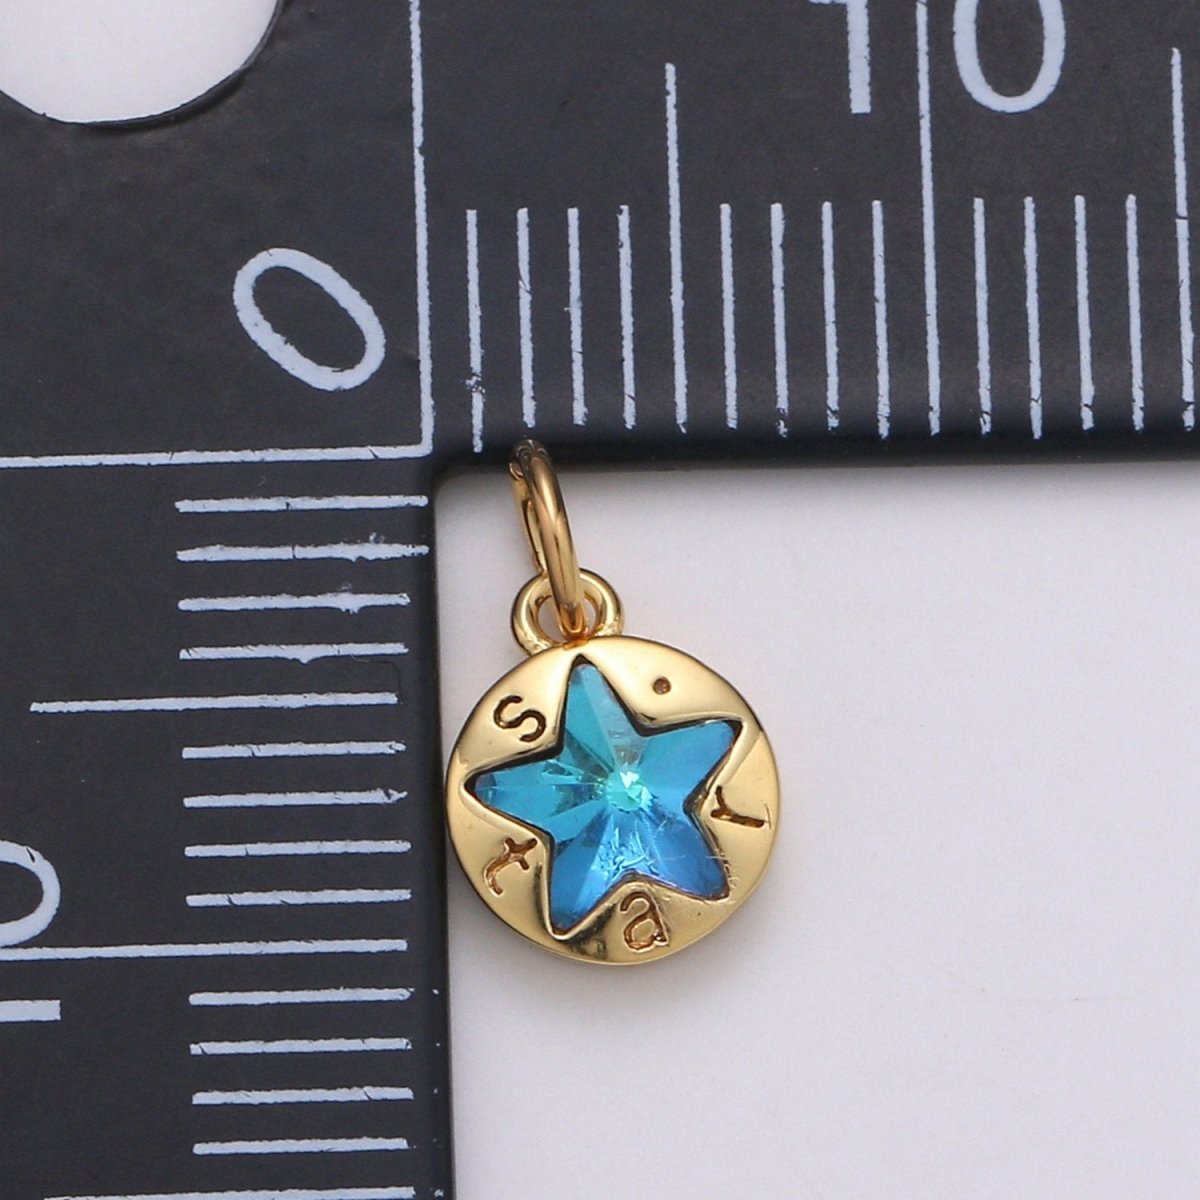 14K Gold Filled Star Charm, Dainty Blue Star Charm for Necklace Bracelet Earring Component C-814 - DLUXCA